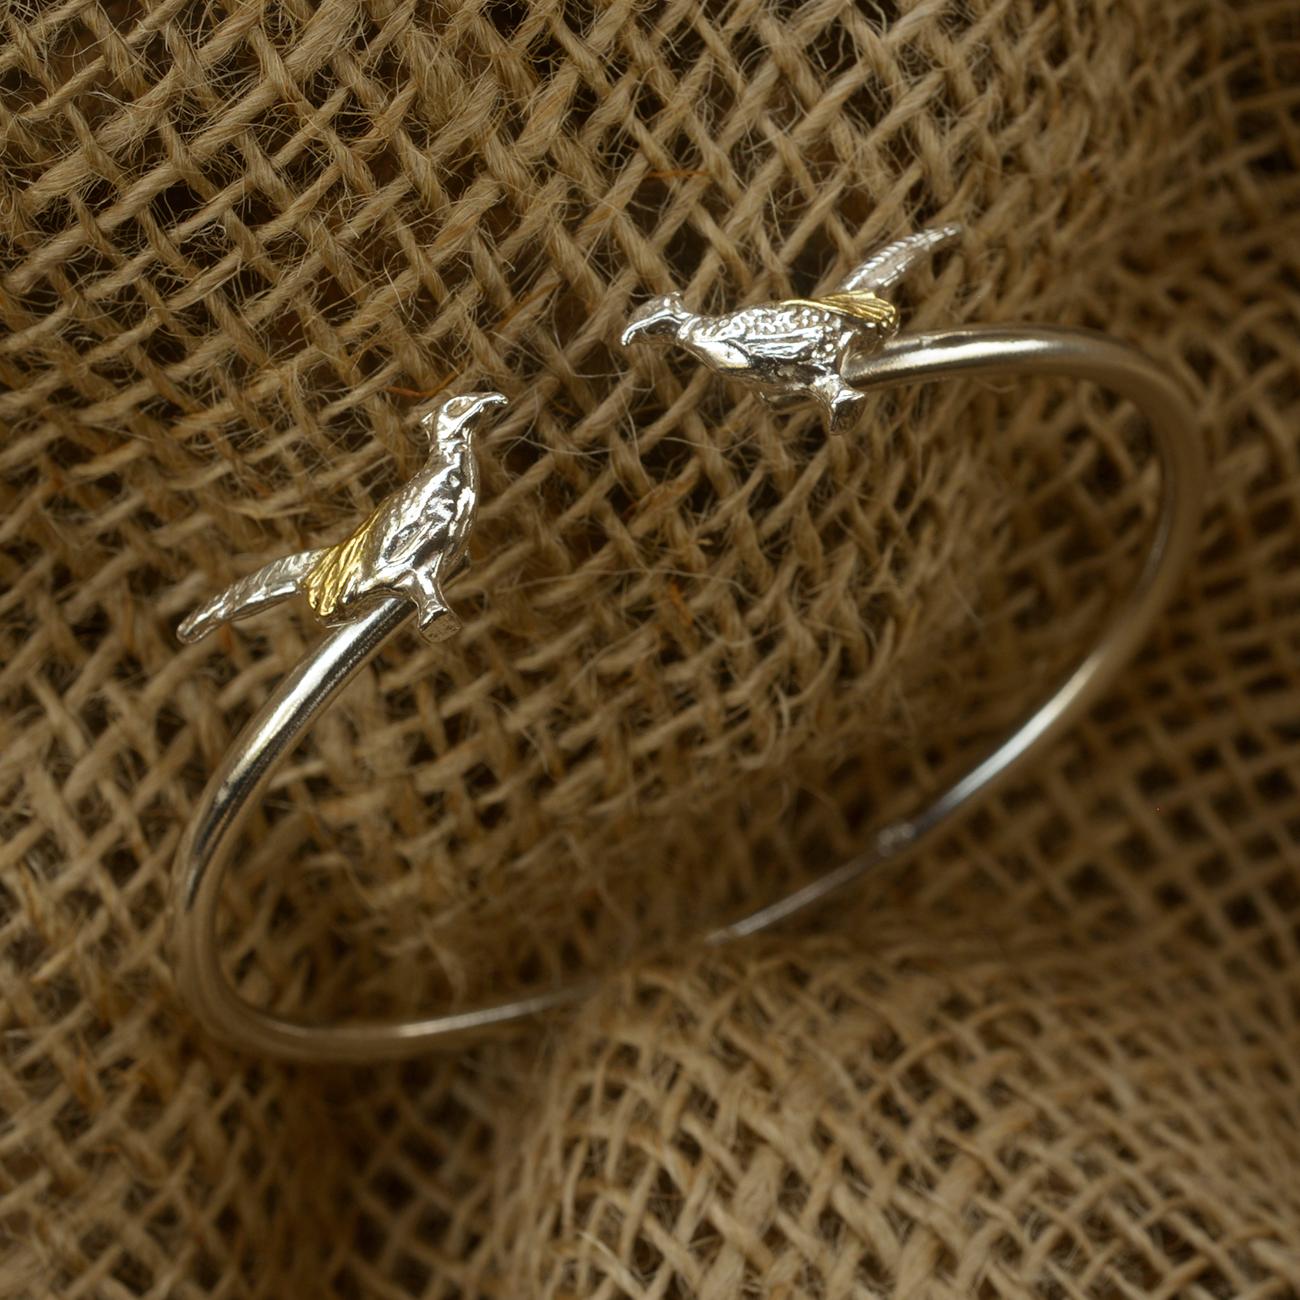 A stunning, unusual Pheasant bangle in 18ct Gold on Solid Sterling Silver.

This robust yet feminine bangle will delight the discerning lady with a penchant for Nature. The Sterling Silver underside is solid and has a natural spring.

This design